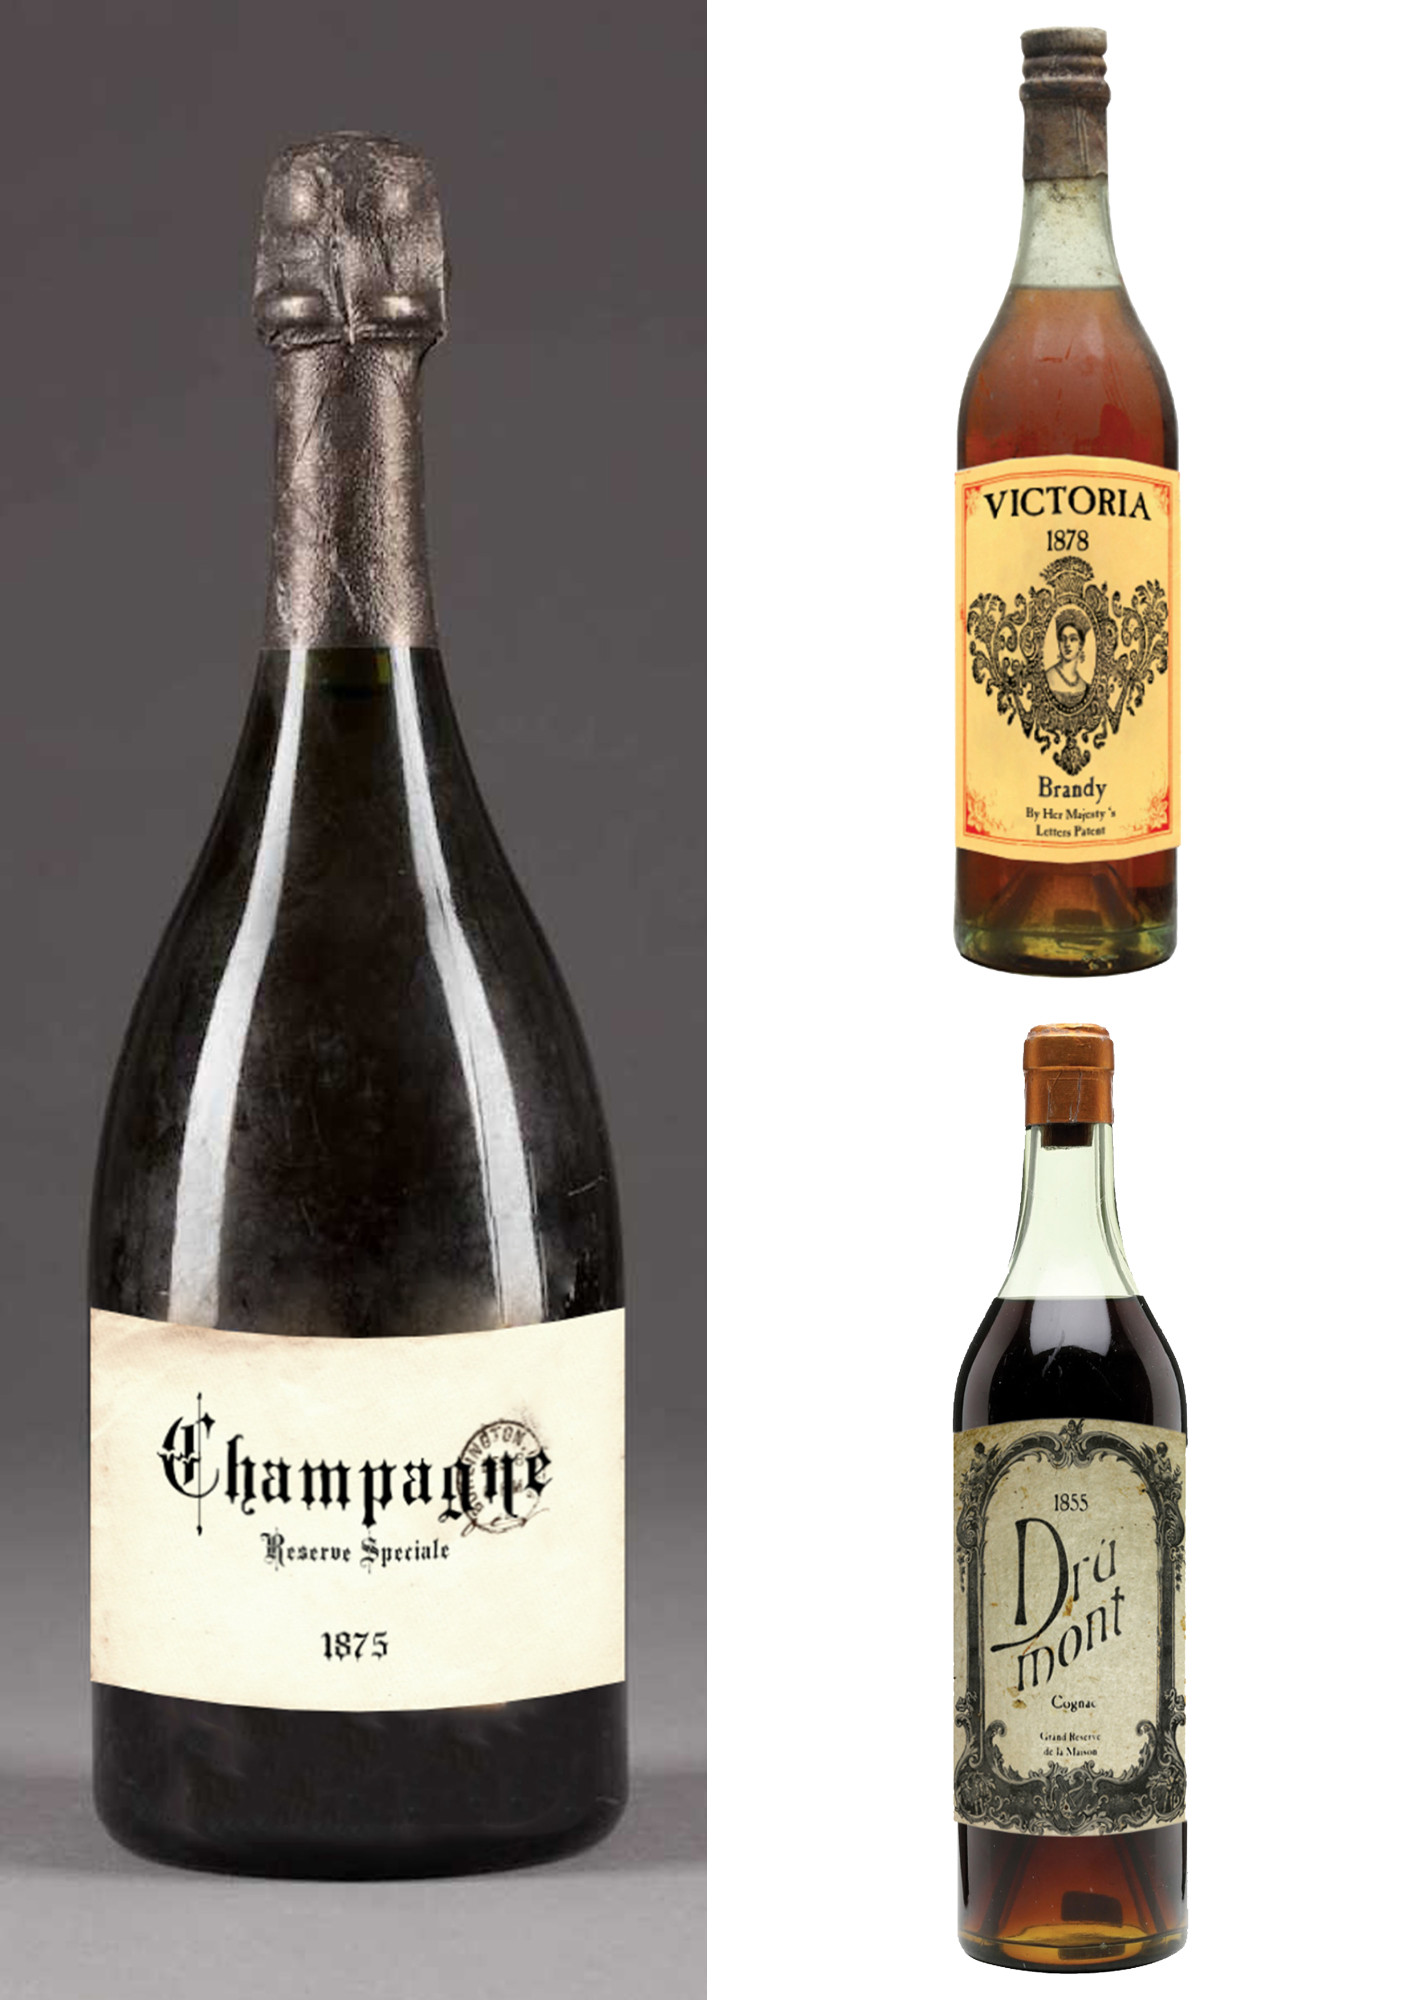 Graphic props for hypothetical film based on the book “The Suicide Club: Story of the Young Man With the Cream Tarts” - bottle labels (champagne, cognac and brandy)